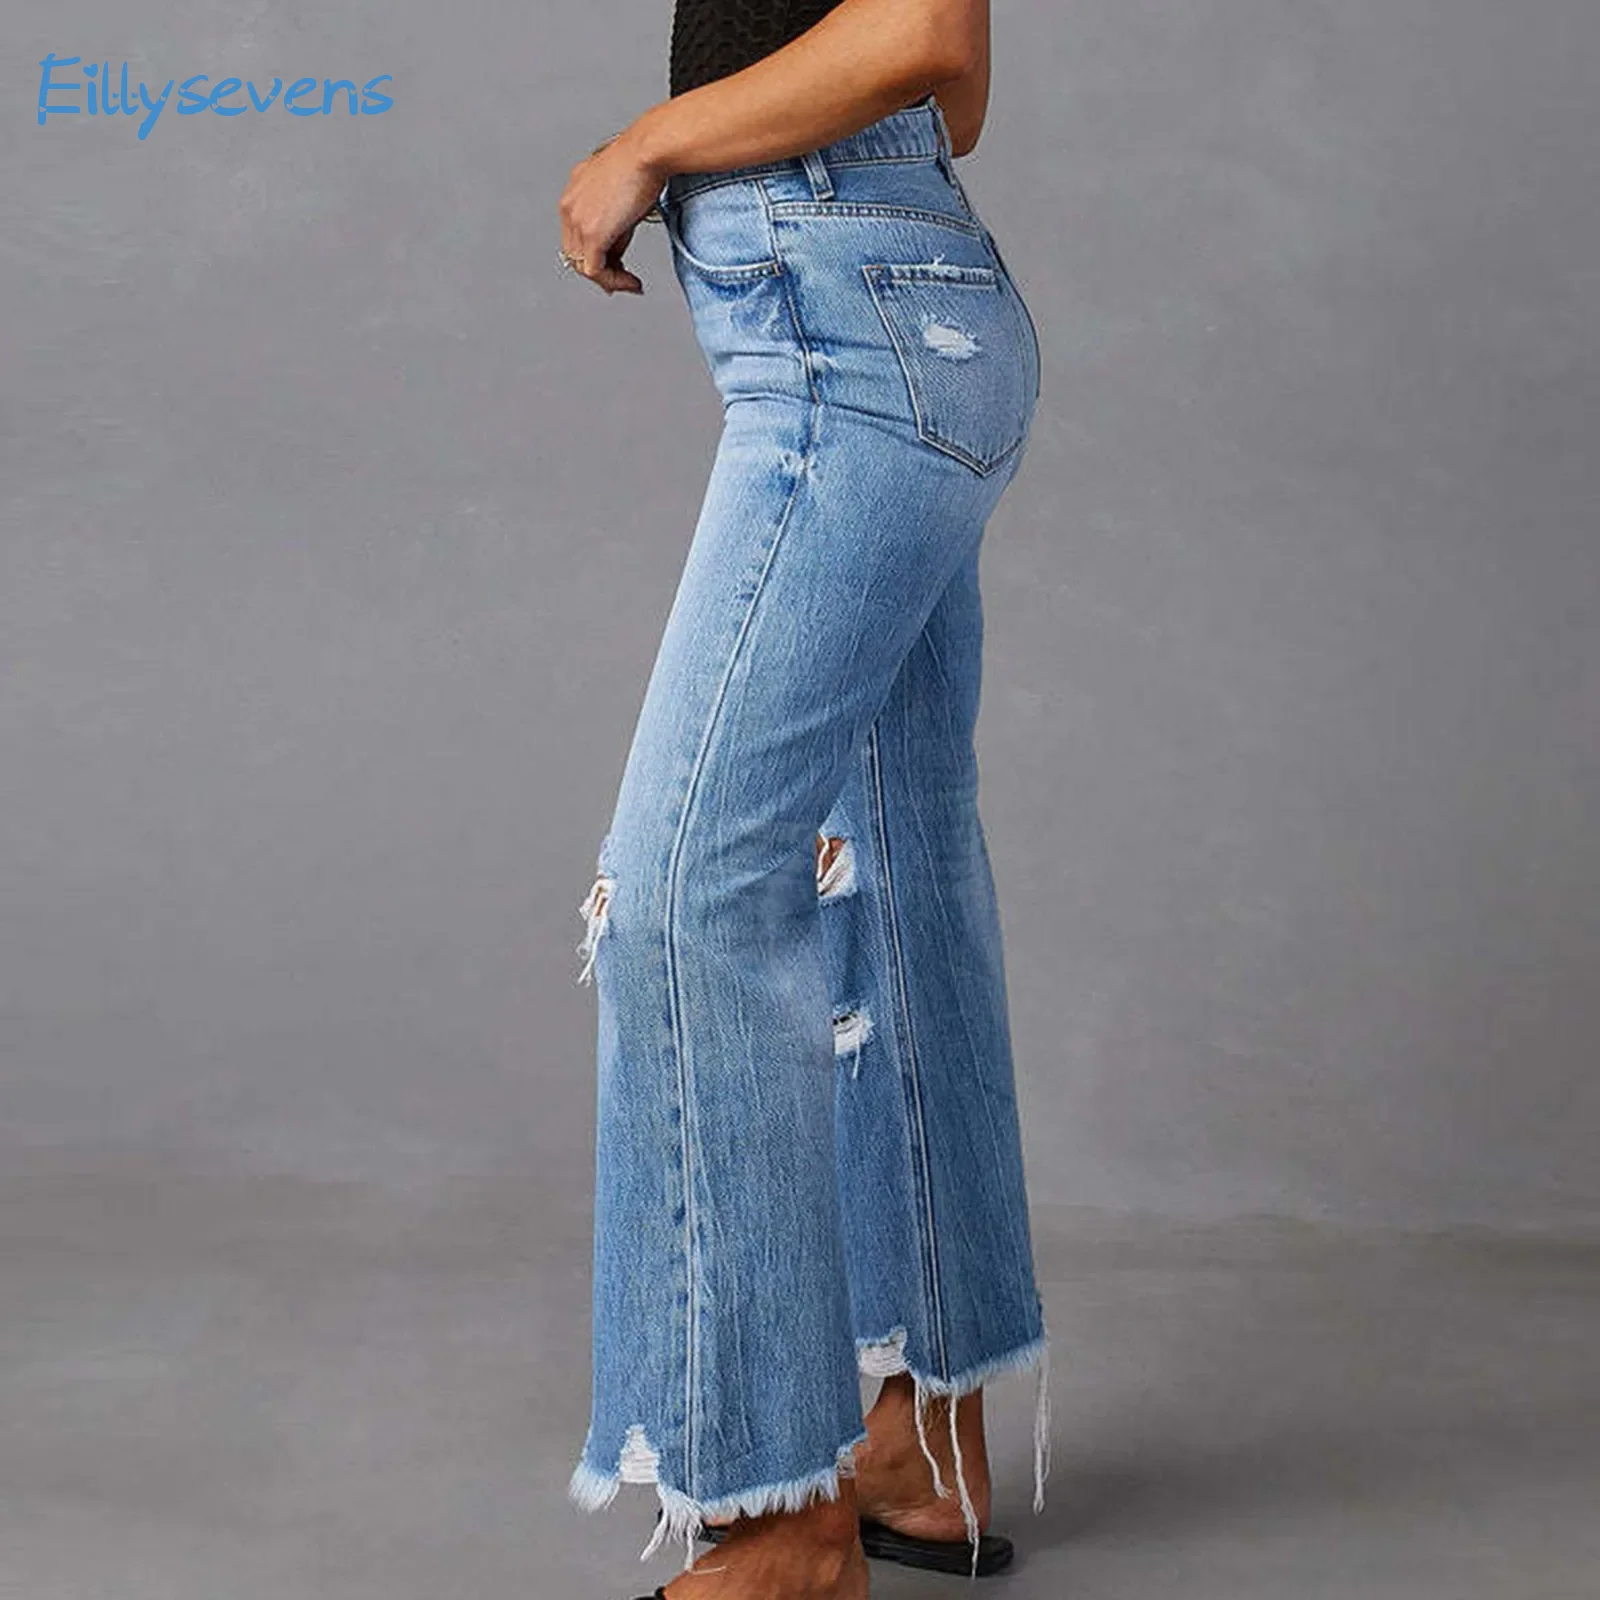 

Fashion Broken Holes Jeans Tassel Bootcut Jeans Women'S Daily Casual All-Match Street Style Cropped Pants Commuter Denim Pants